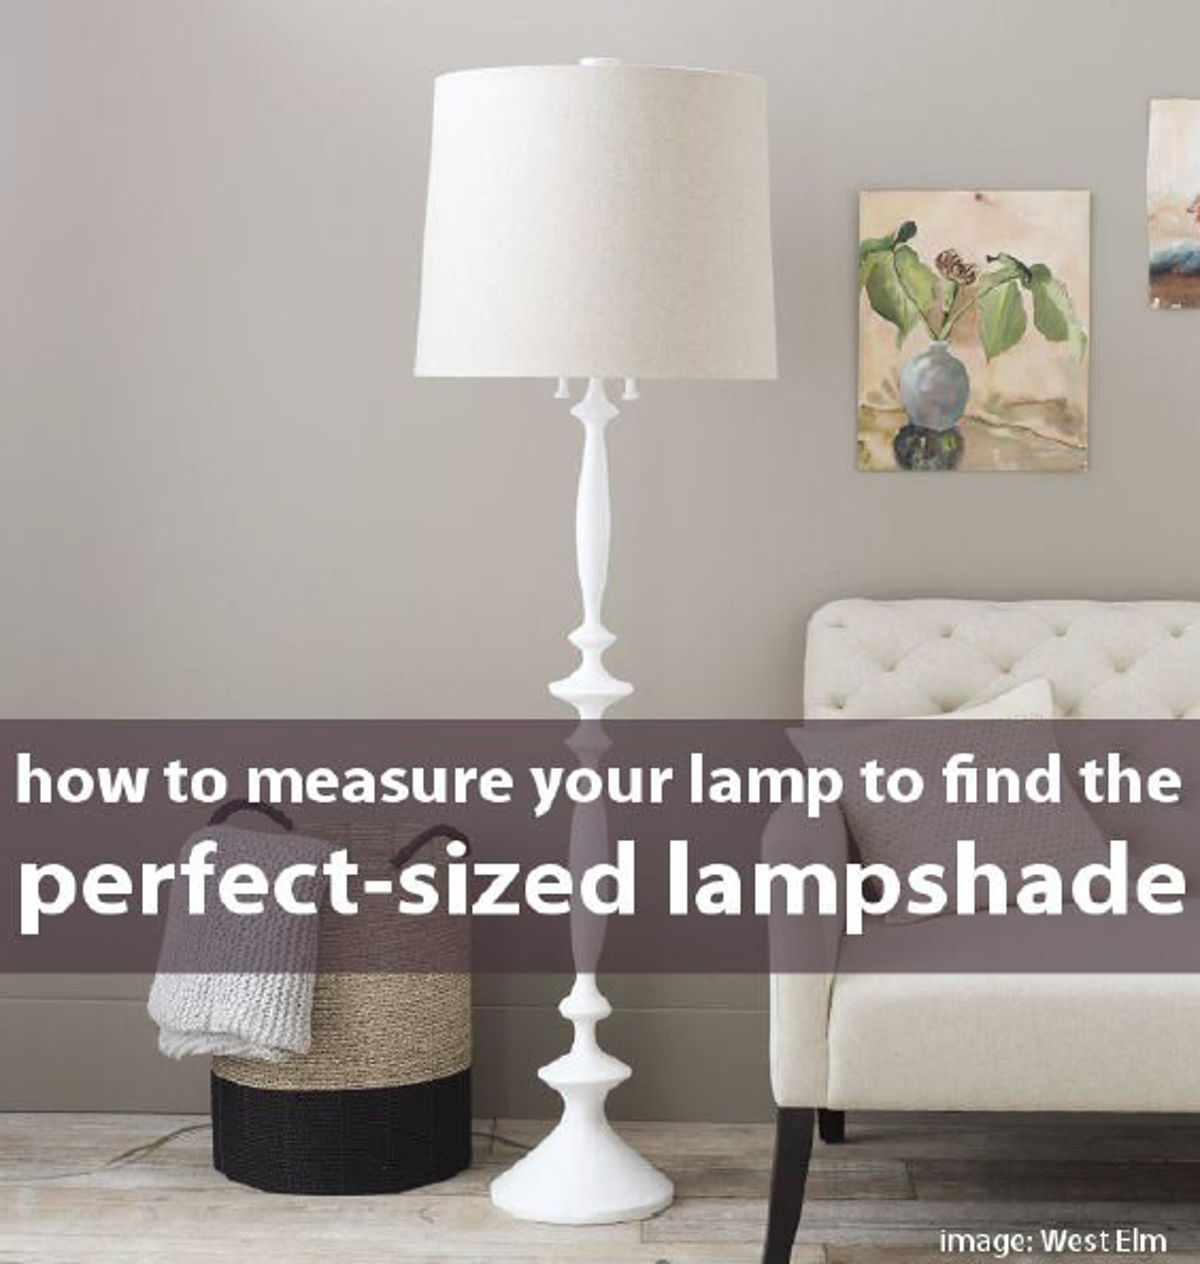 What Size Lampshade You Need For Your, How To Determine Lampshade Size For Floor Lamp